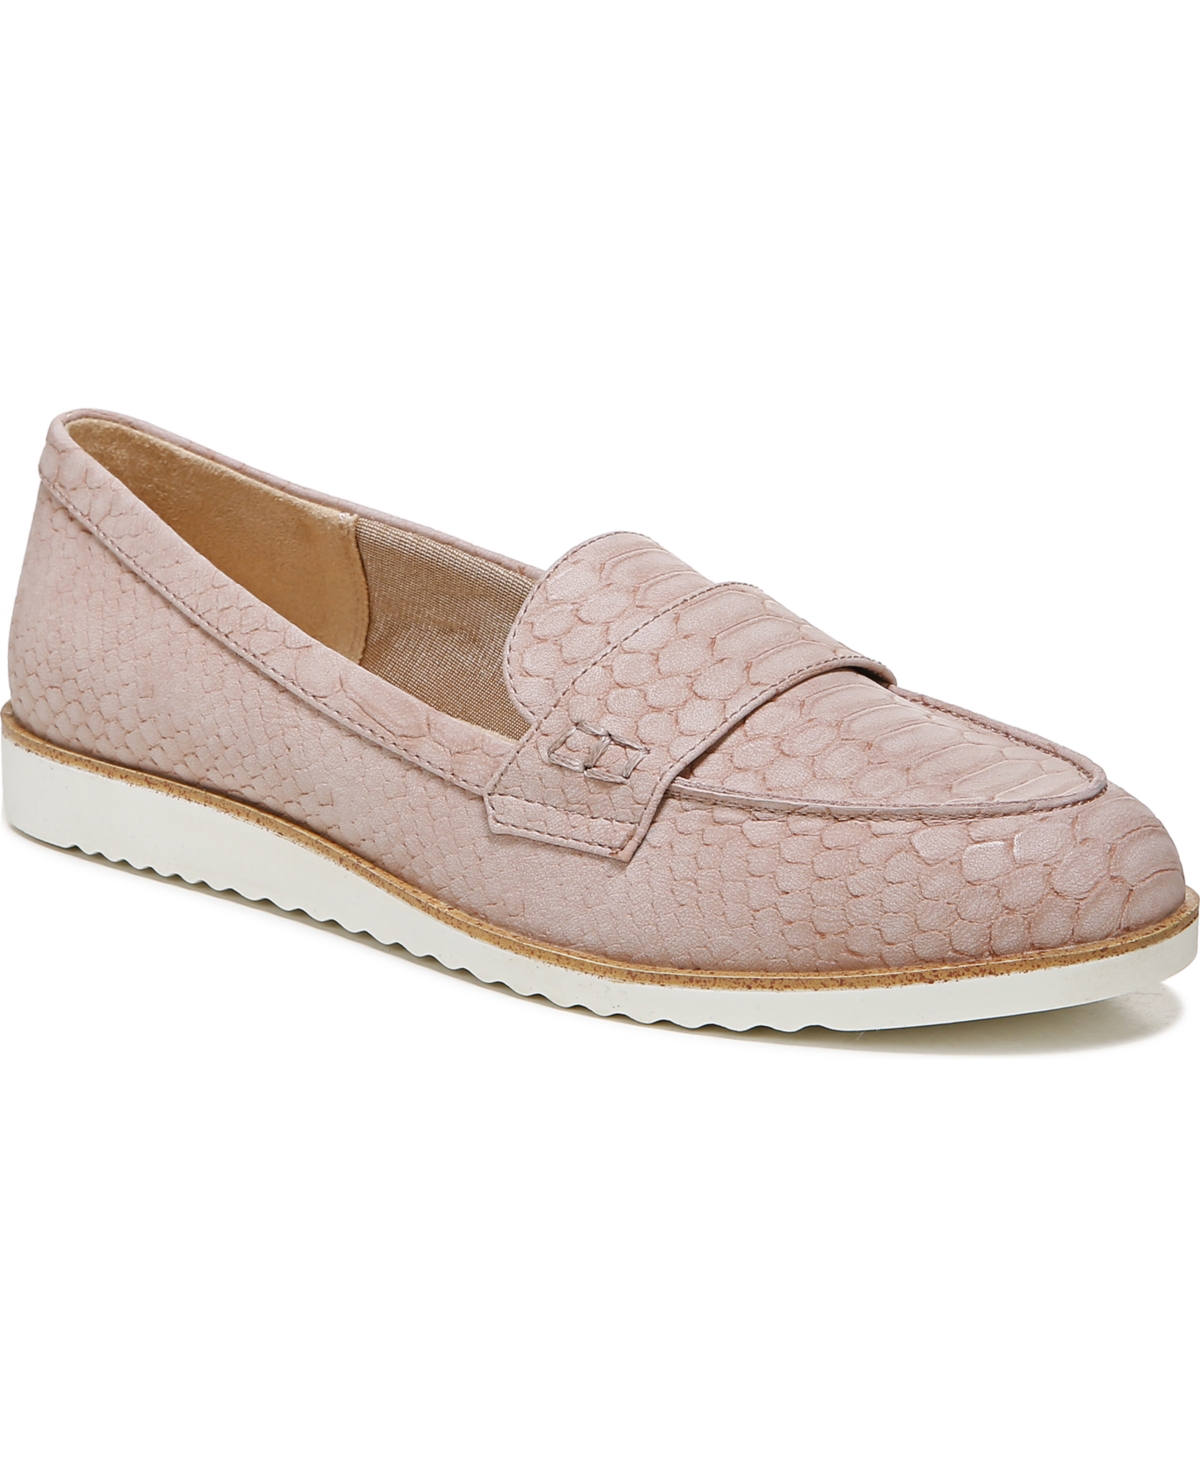 Lifestride Zee Slip-on Loafers Women's Shoes In Mauve Fabric | ModeSens